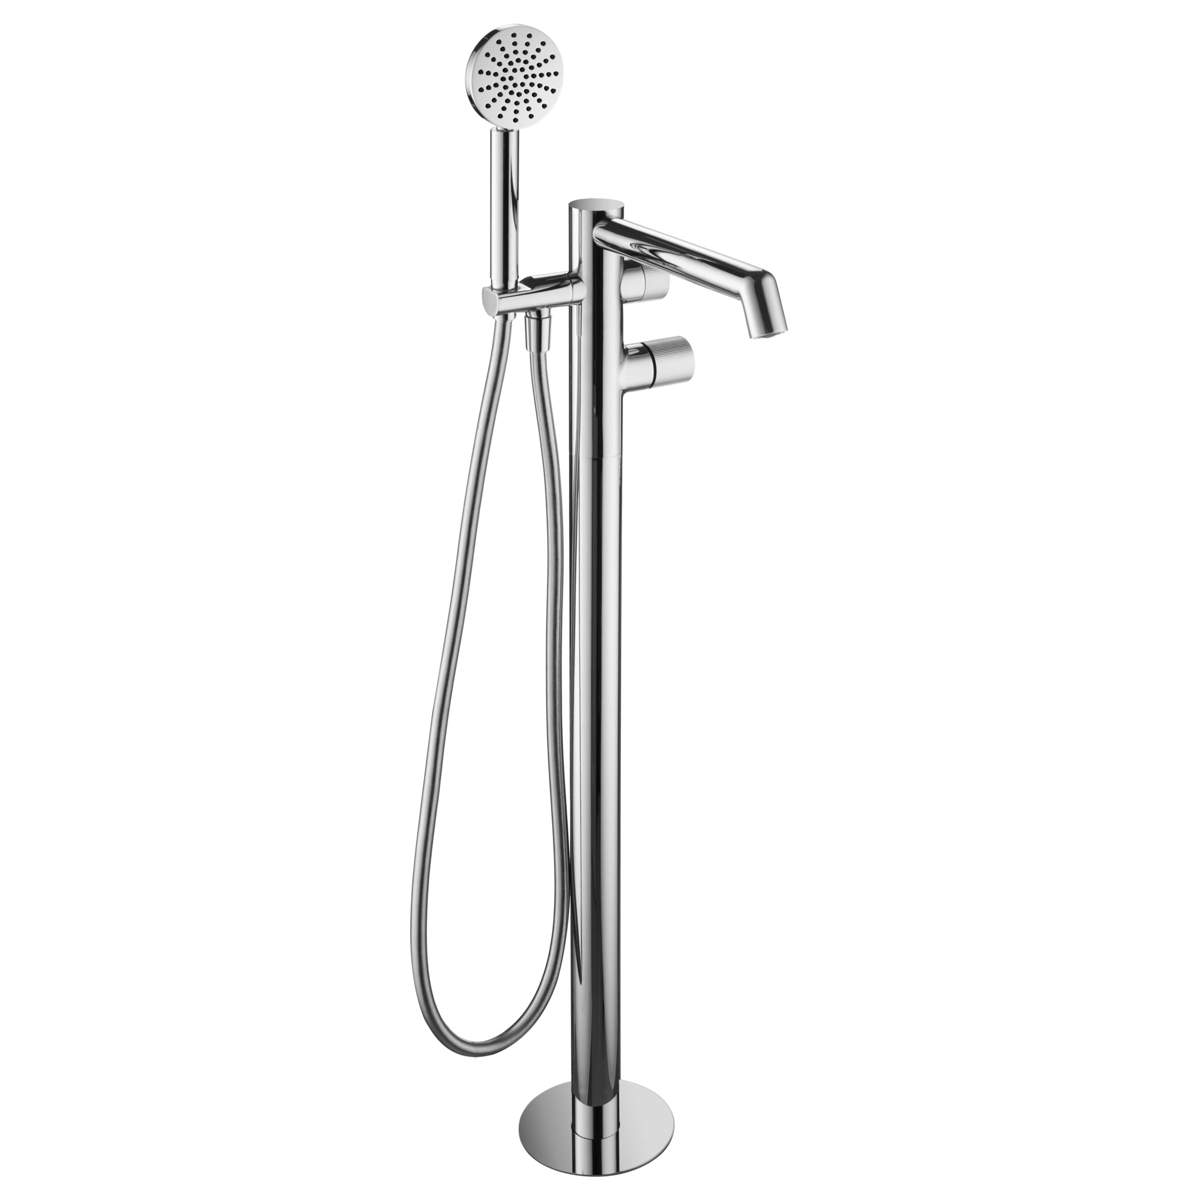 JTP Evo Chrome Floor Standing Bath Shower Mixer with Kit but no Lever (64534CH)